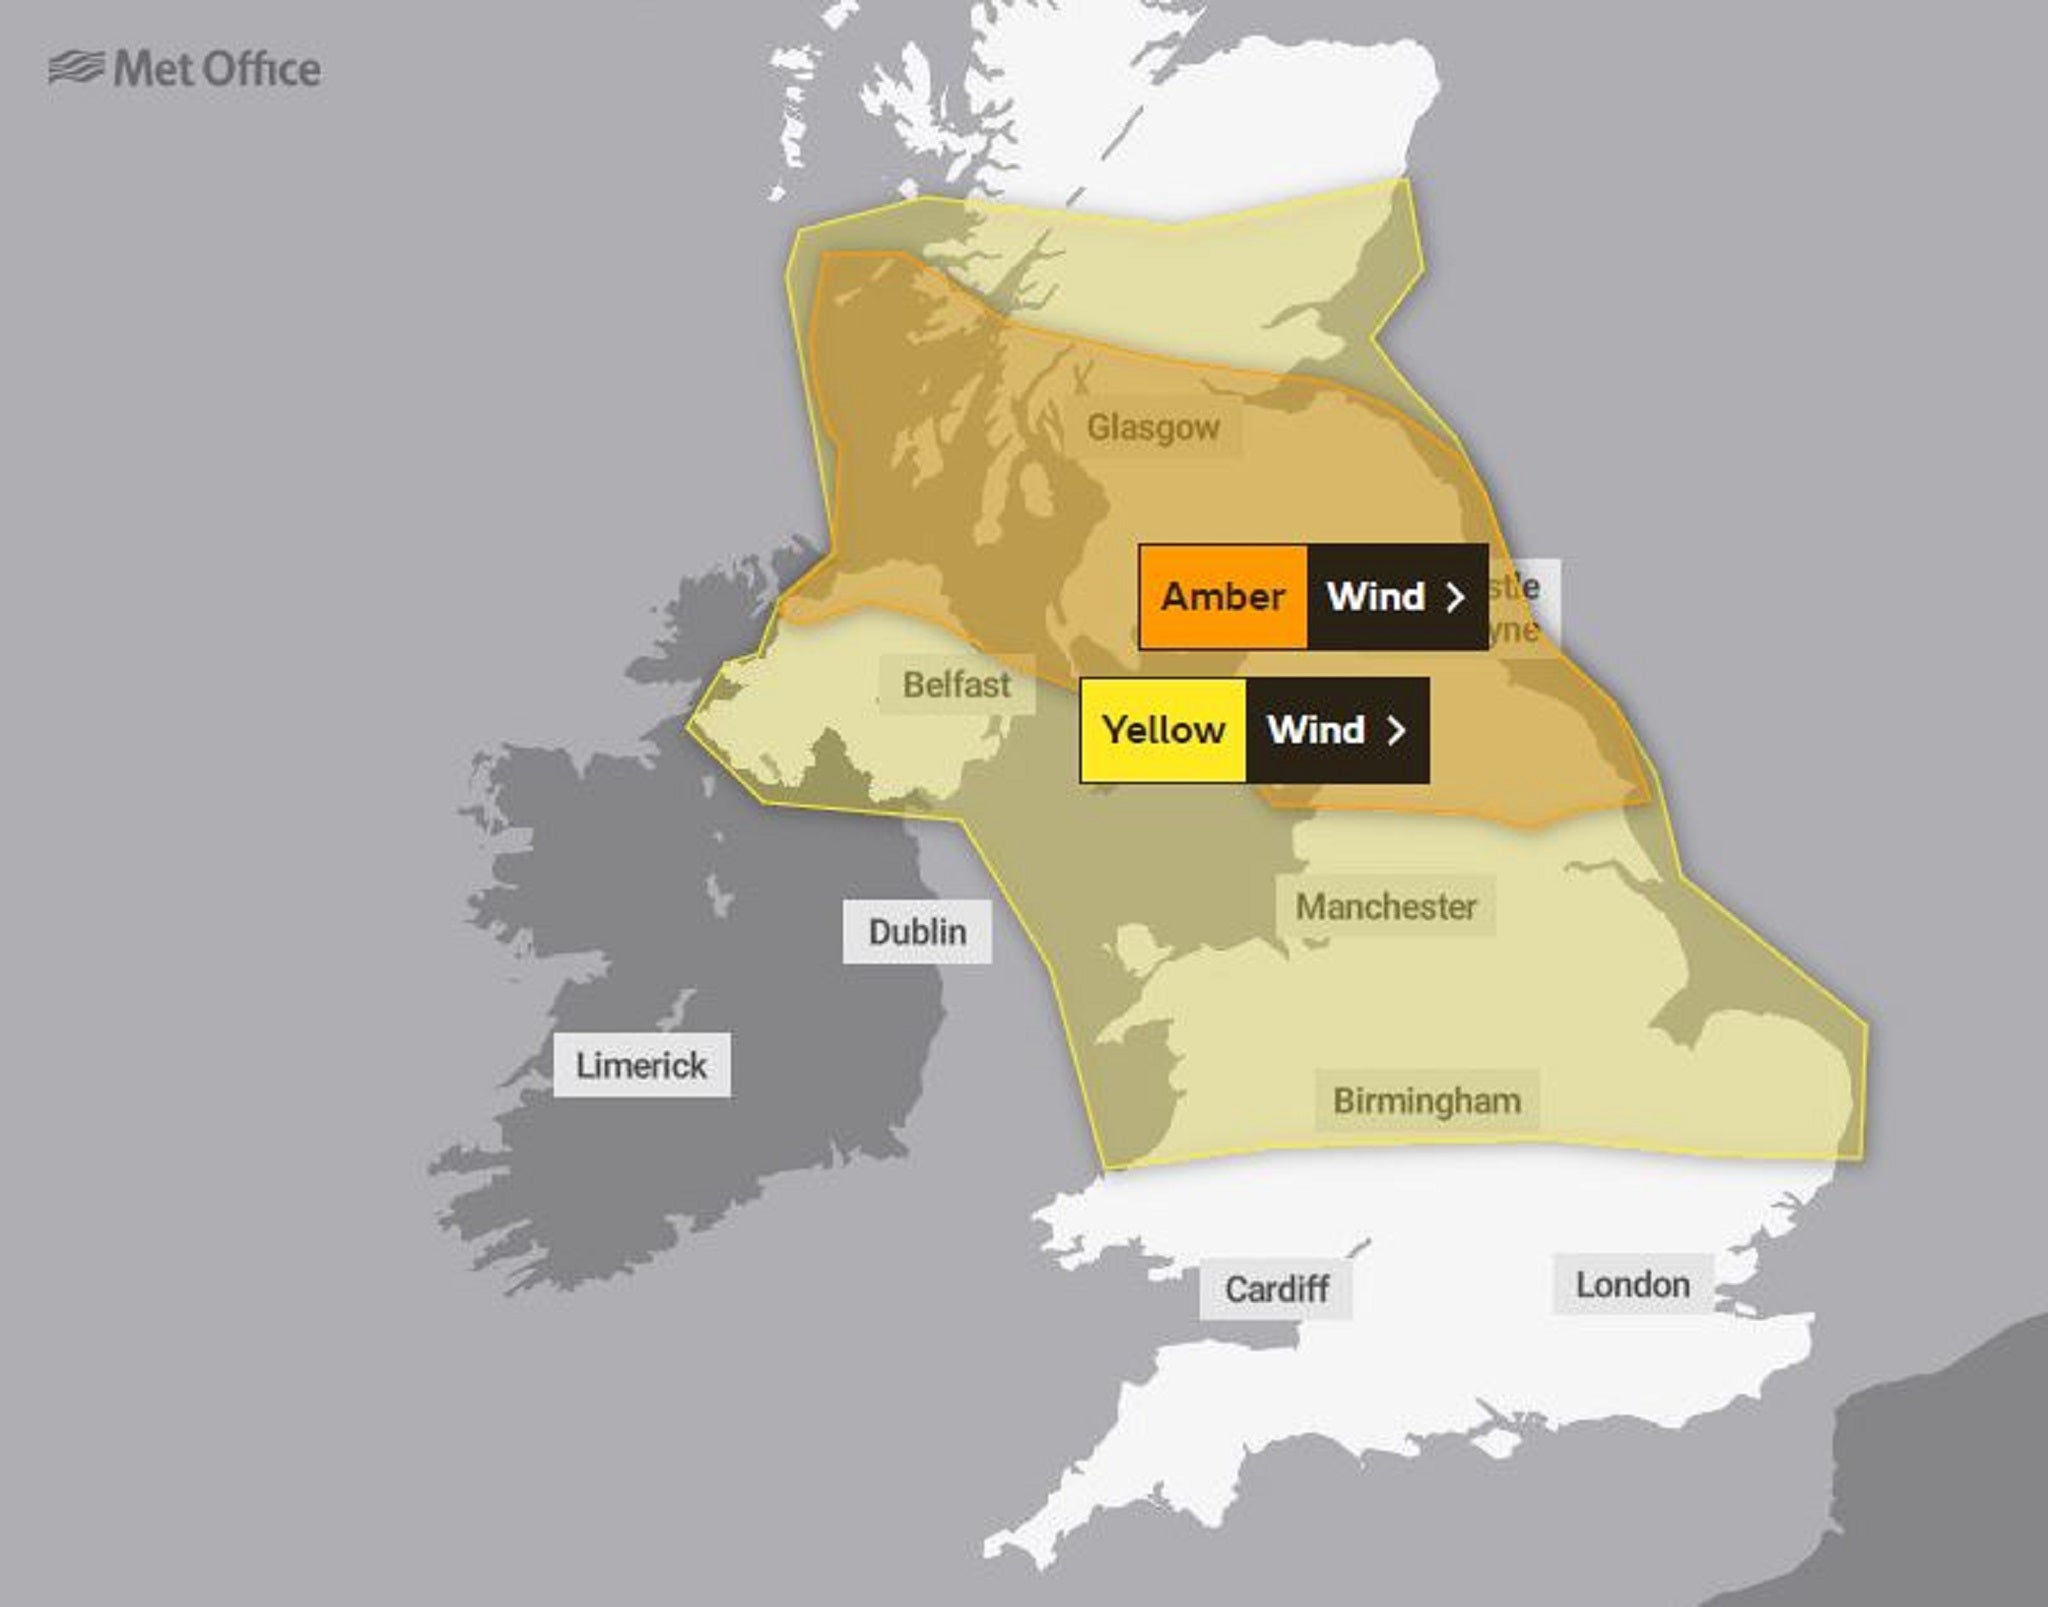 Weather warnings for wind have been issued for much of the UK on Wednesday ahead of Storms Dudley and Eunice